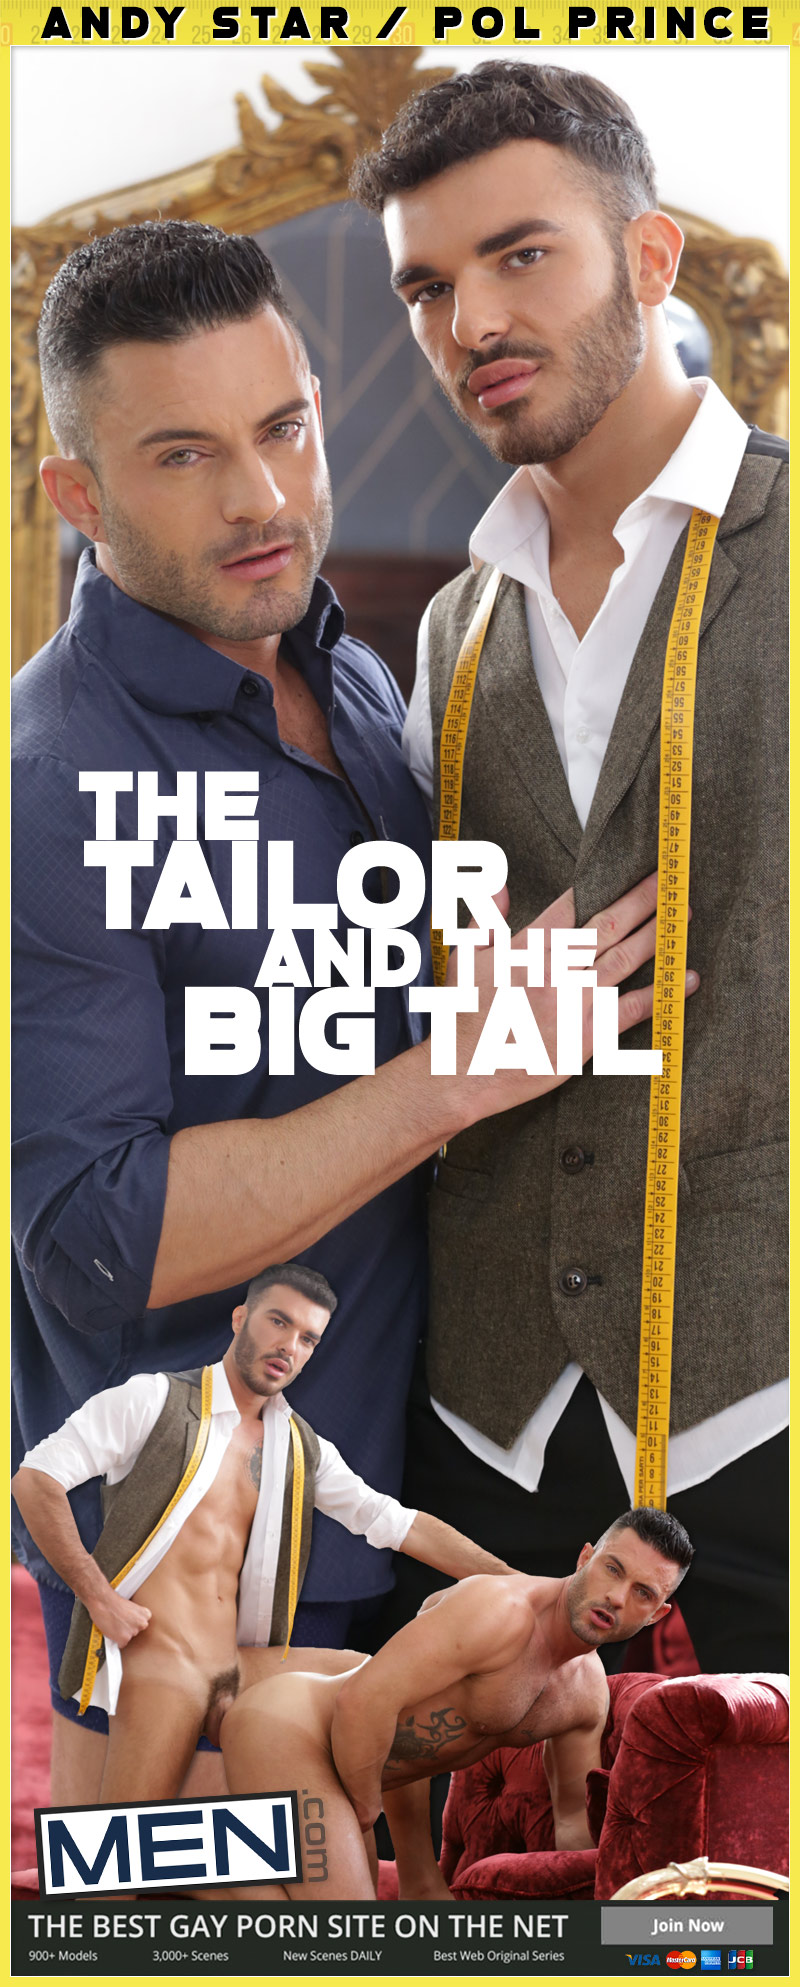 The Tailor and the Big Tail (Andy Star Bottoms For Pol Prince) at MEN.com